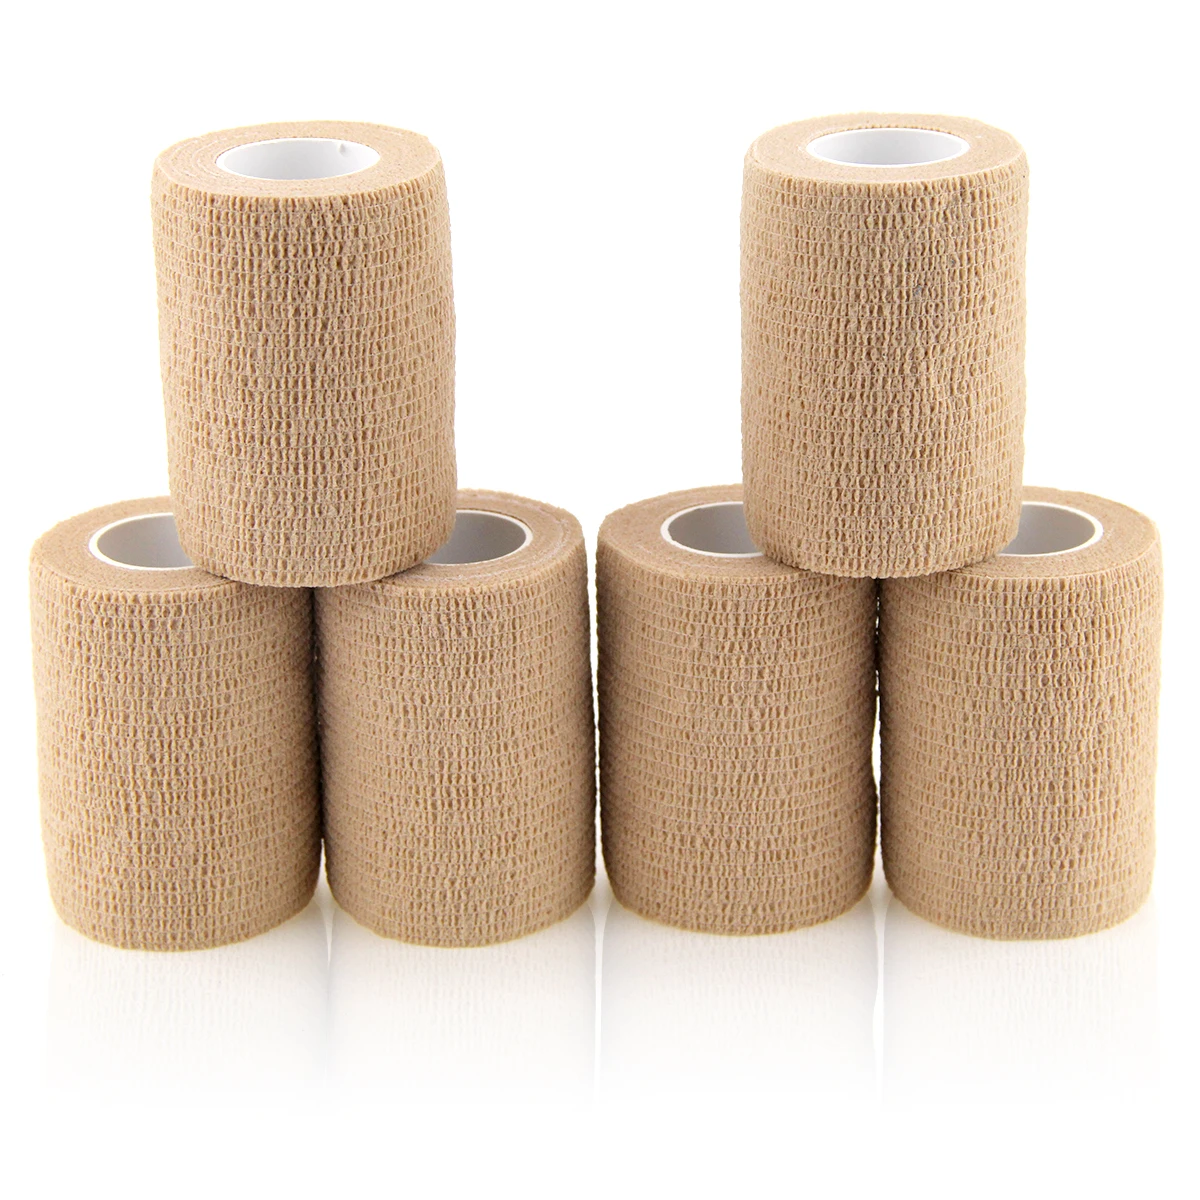 

6 Rolls 7.5cm Self Adhesive Bandage Nonwoven Bandage Sports Tape Breathable Muscle Wraps Medical Health Care